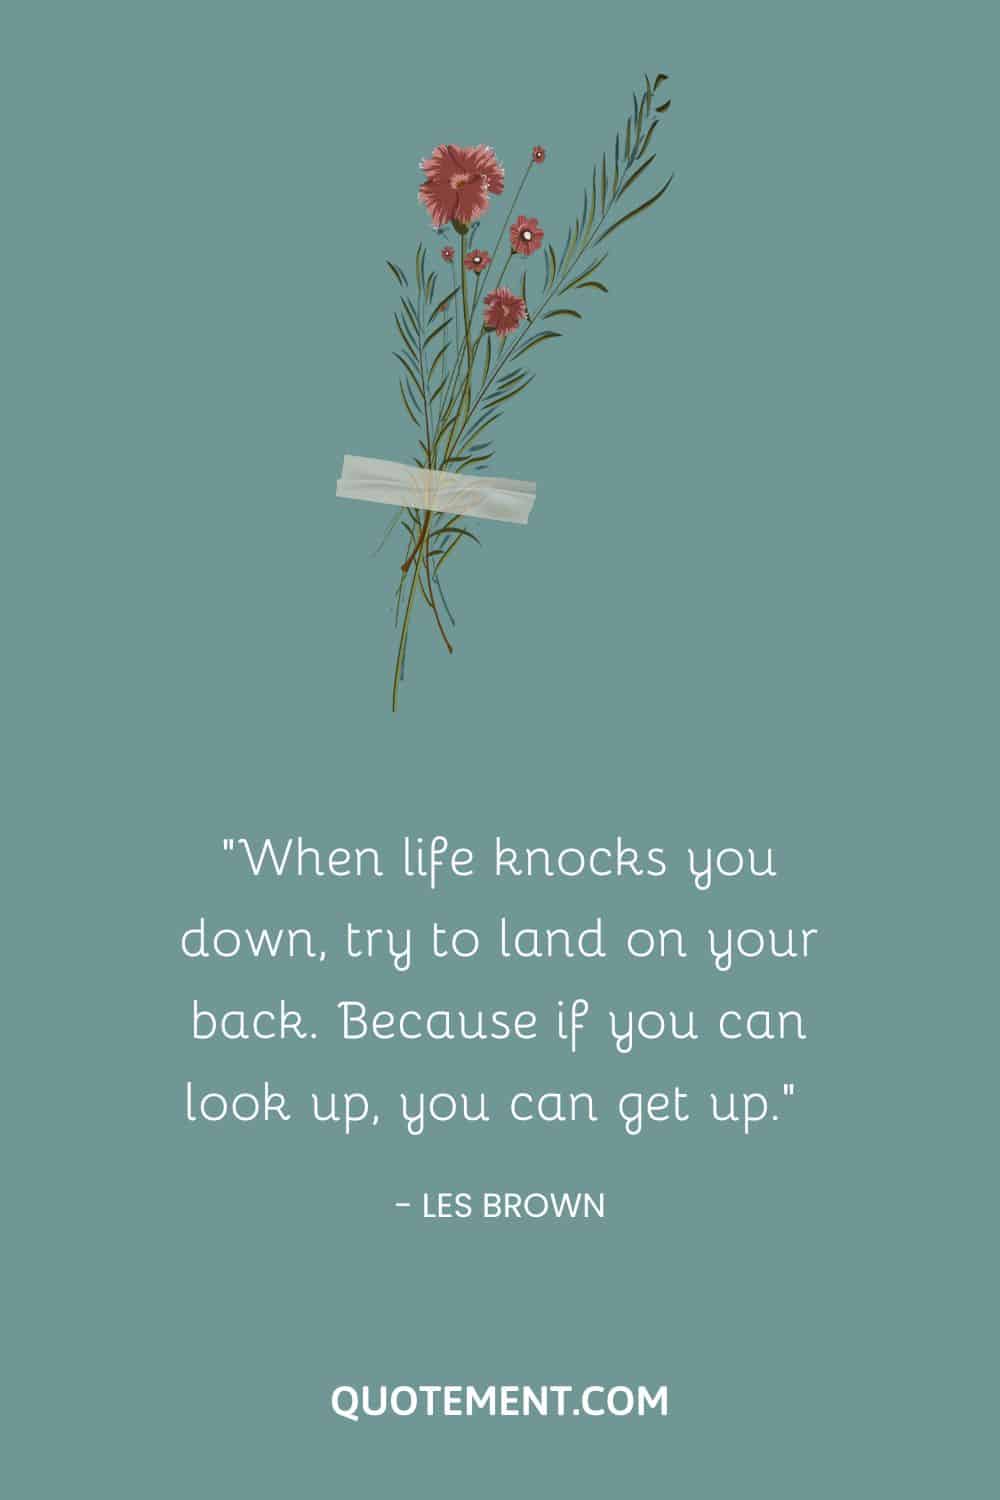 When life knocks you down, try to land on your back